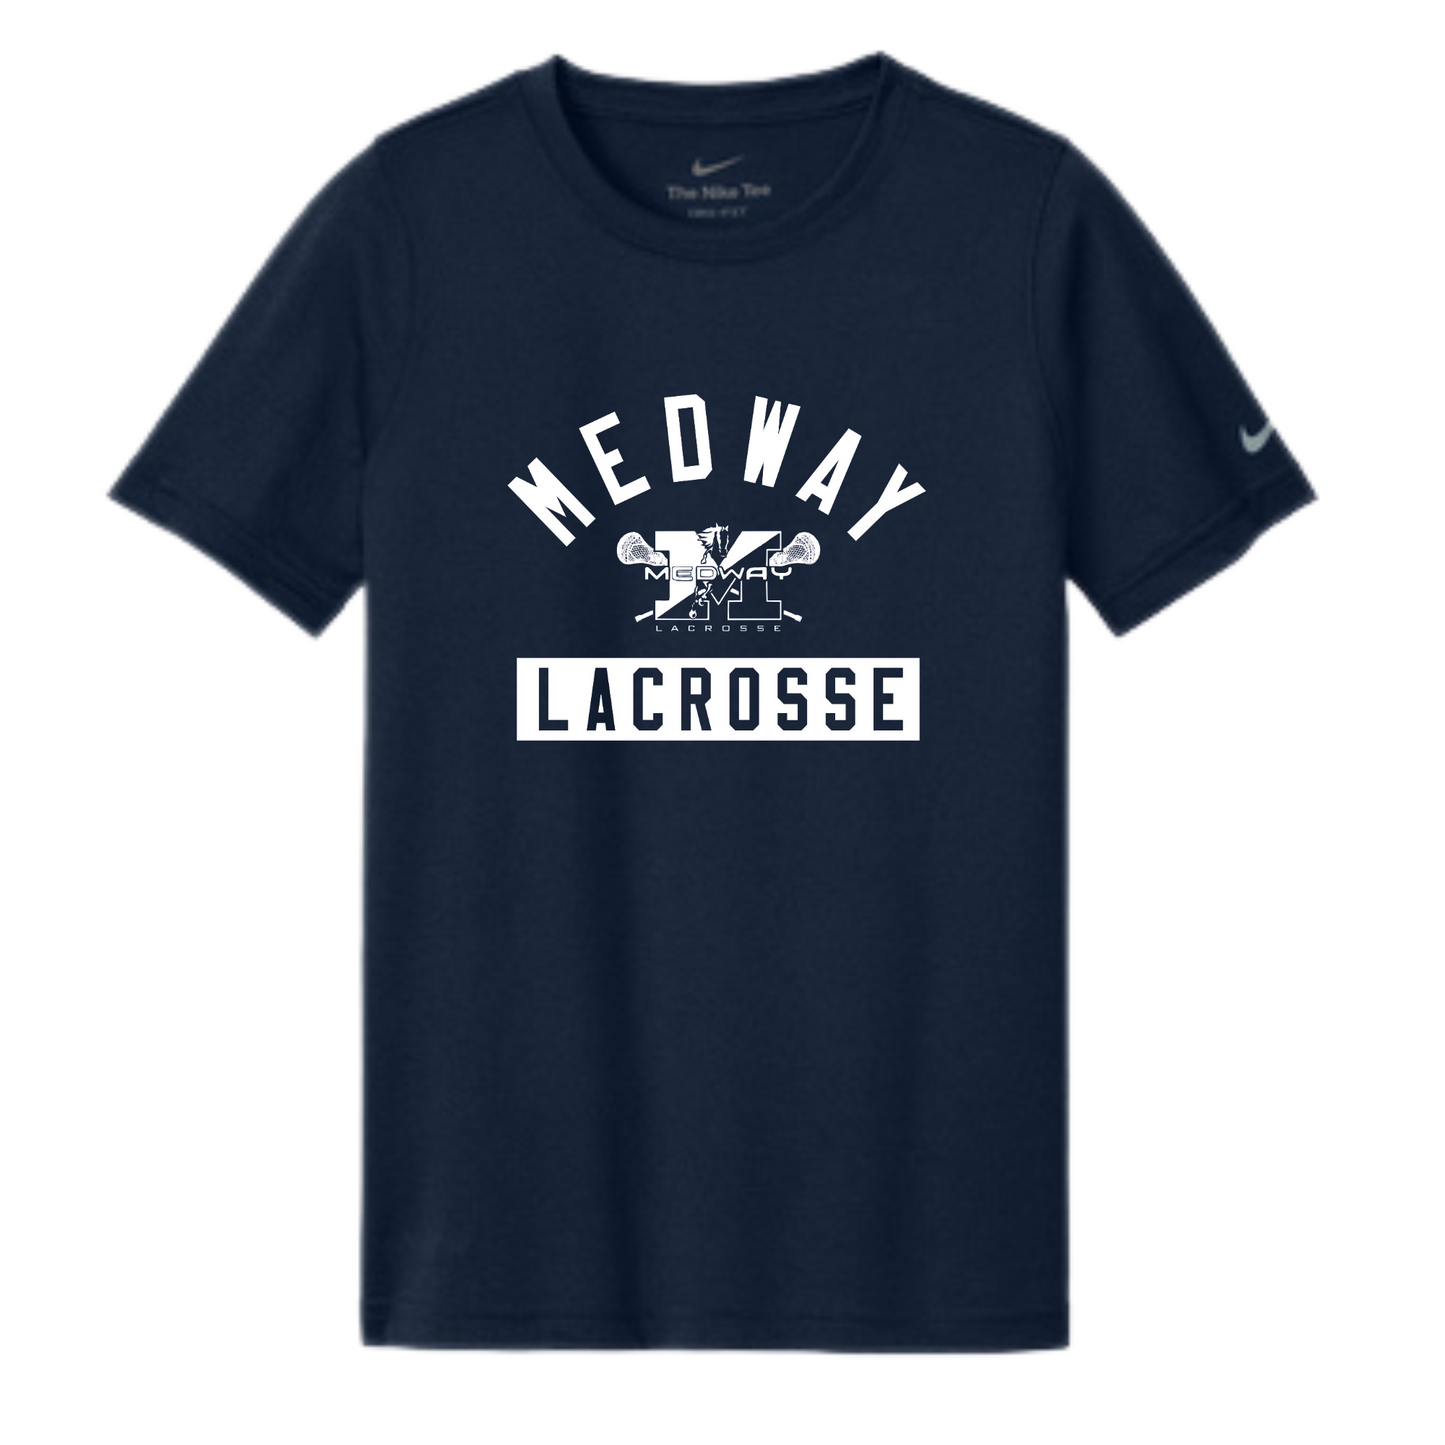 MEDWAY YOUTH LACROSSE ARCH NIKE LEGEND YOUTH TEE - NAVY